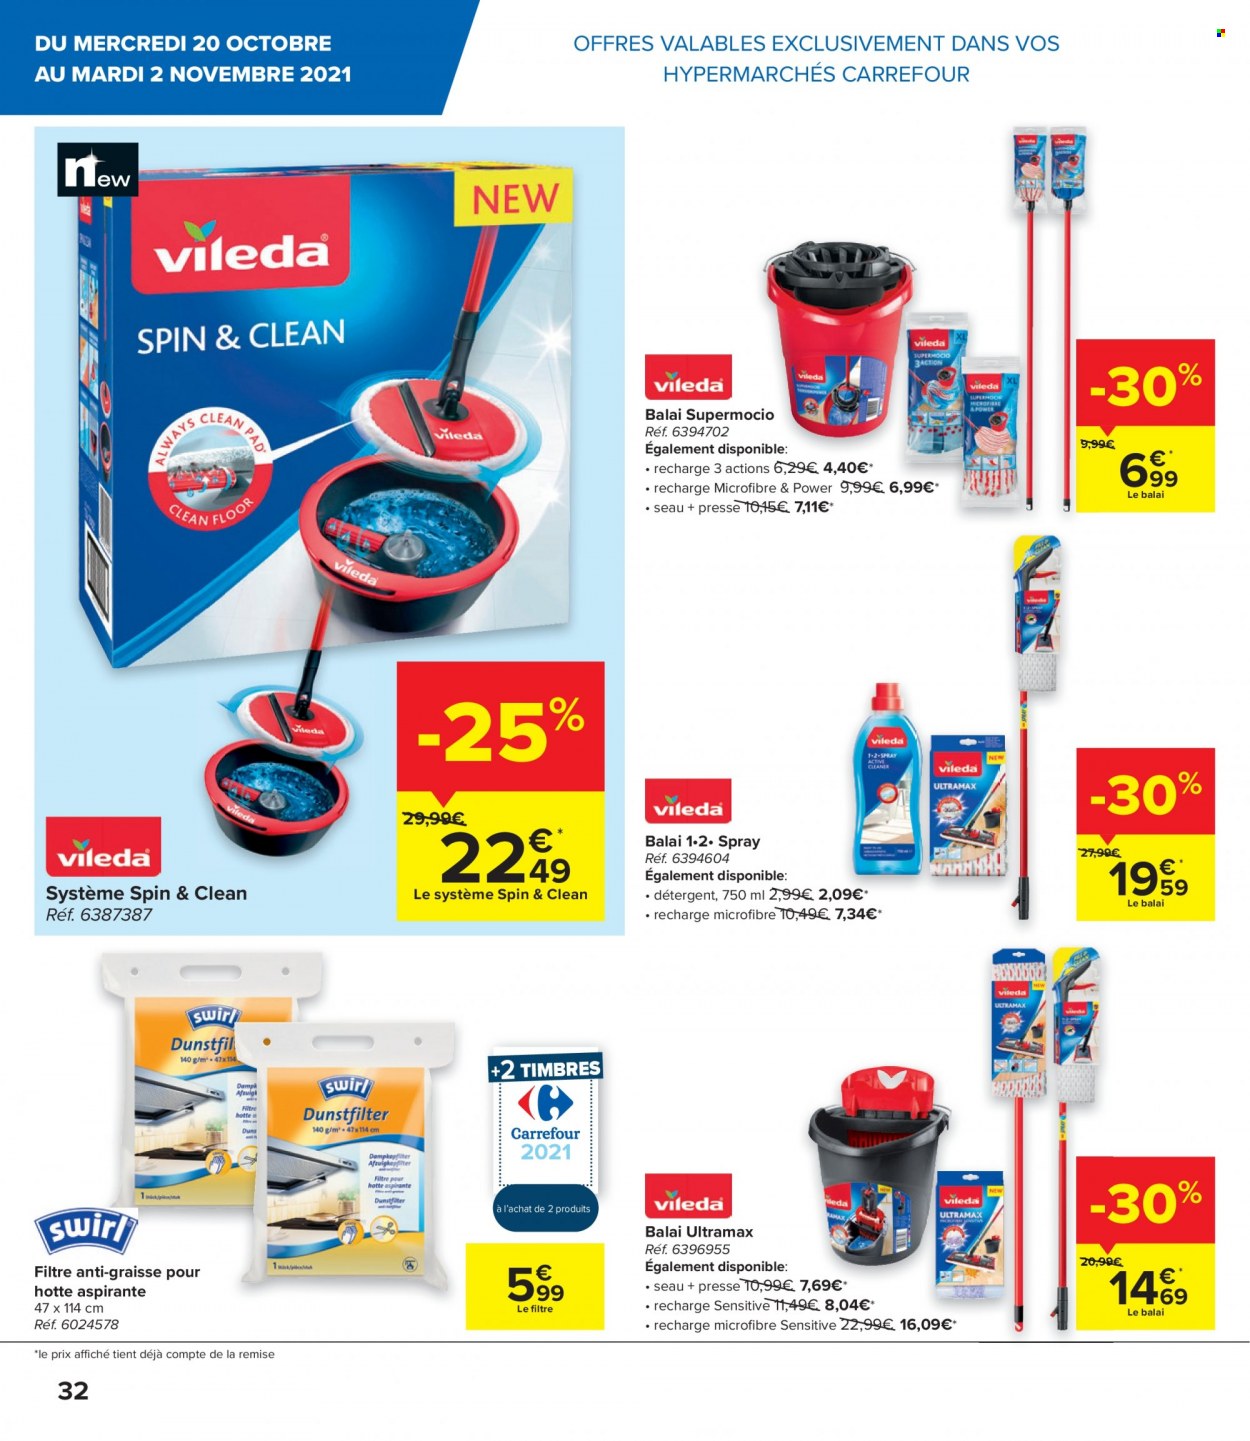 Catalogue Carrefour hypermarkt - 20.10.2021 - 2.11.2021. Page 8.